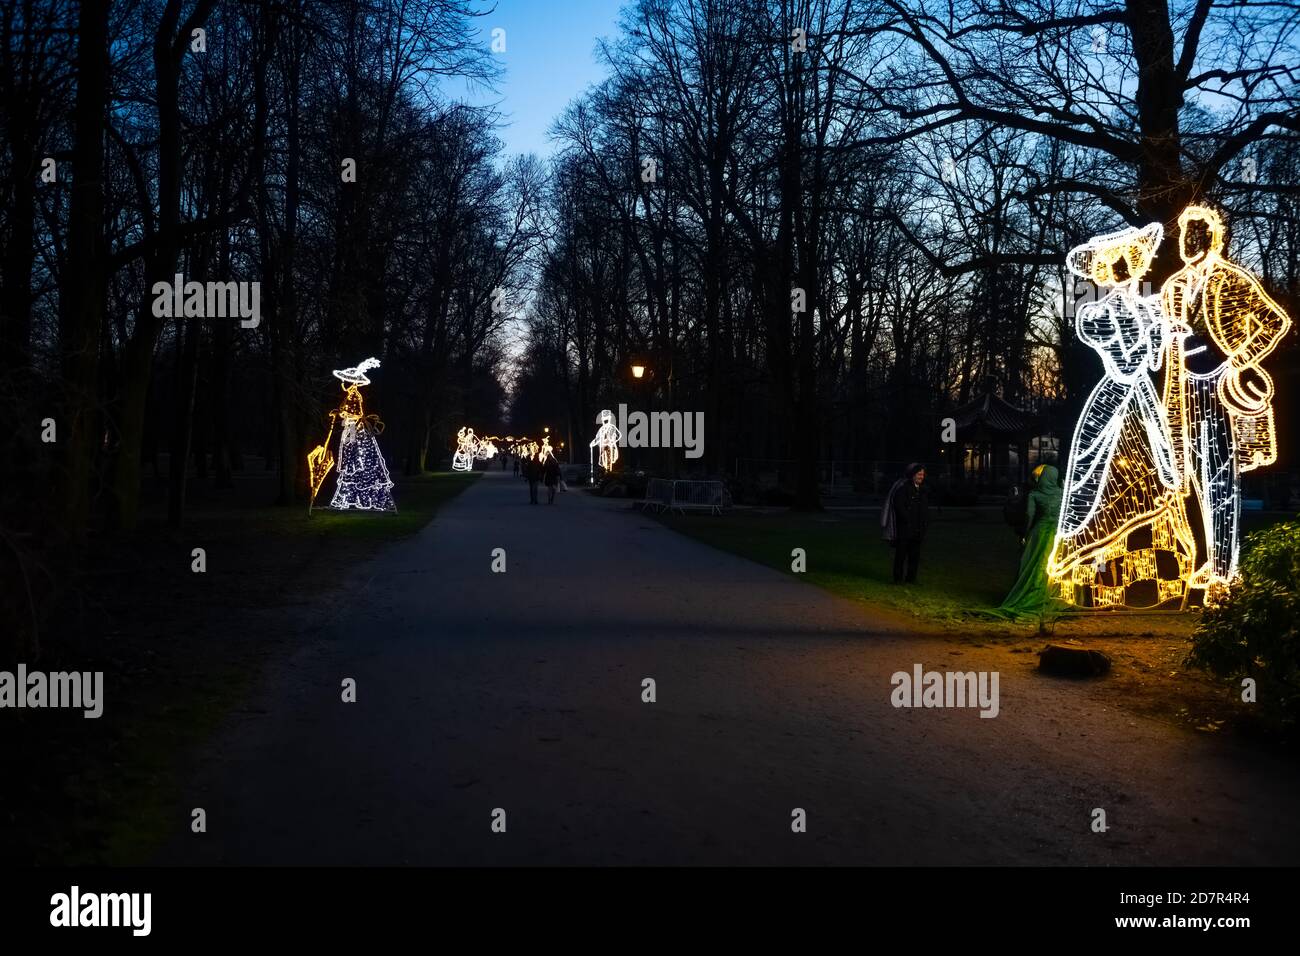 Warsaw, Poland - December 20, 2019: Illuminated decoration lights garland of couple statue at night evening at Christmas in Lazienki park with people Stock Photo